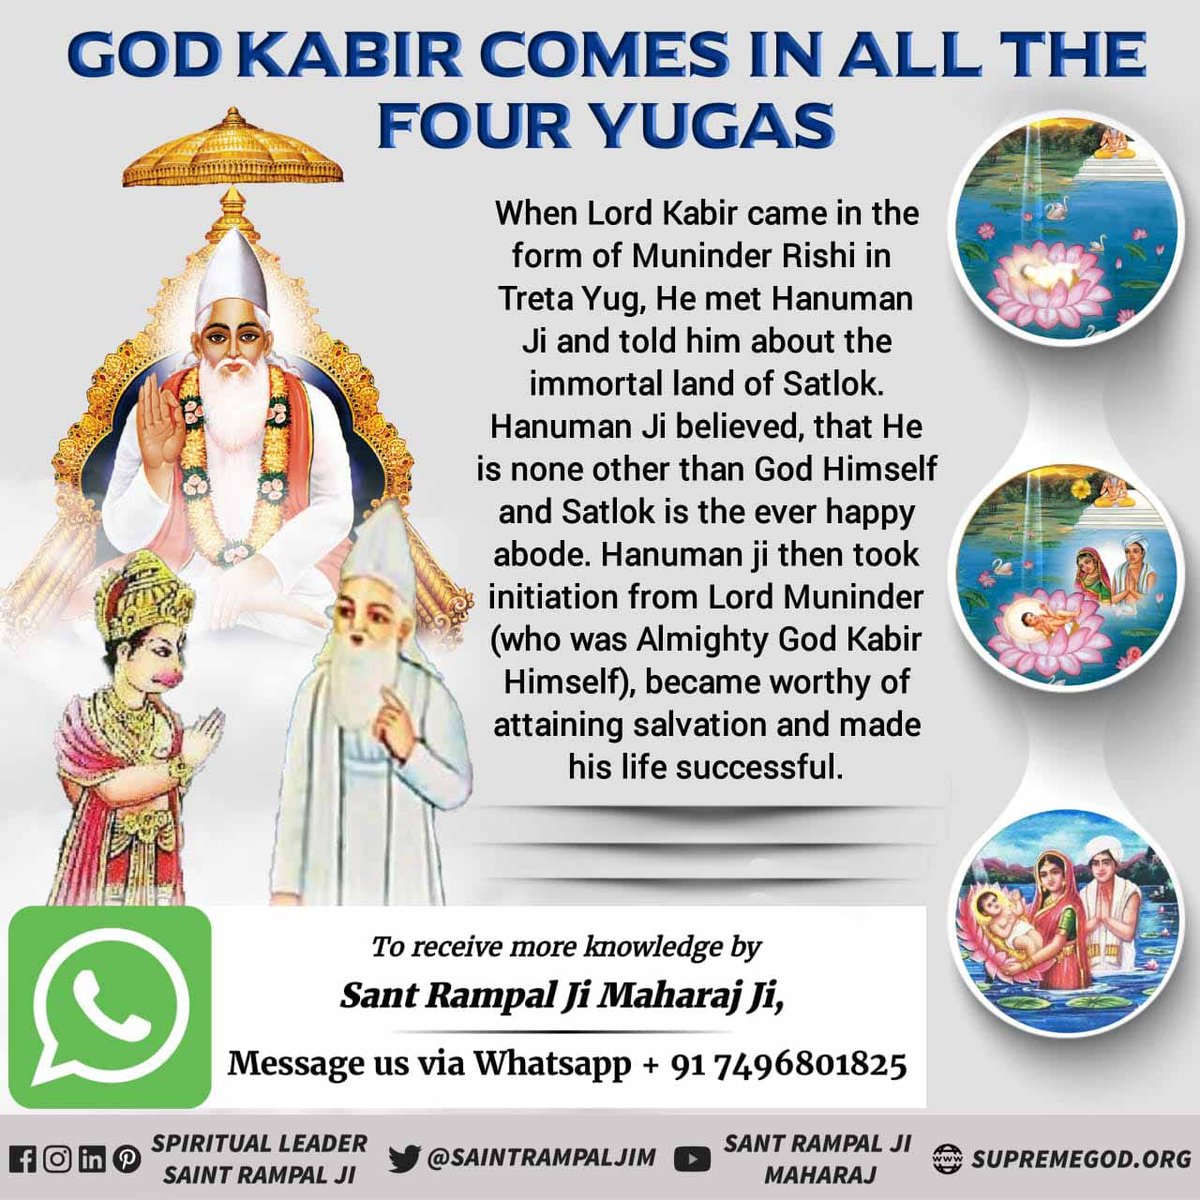 #अविनाशी_परमात्मा_कबीर Lord Kabir appears in the form of an infant in all four Yugas and makes one devotee of his, the preacher of his knowledge, through which the Guru lineage continues and the kabir panth gets propagated. Sant Rampal Ji Maharaj